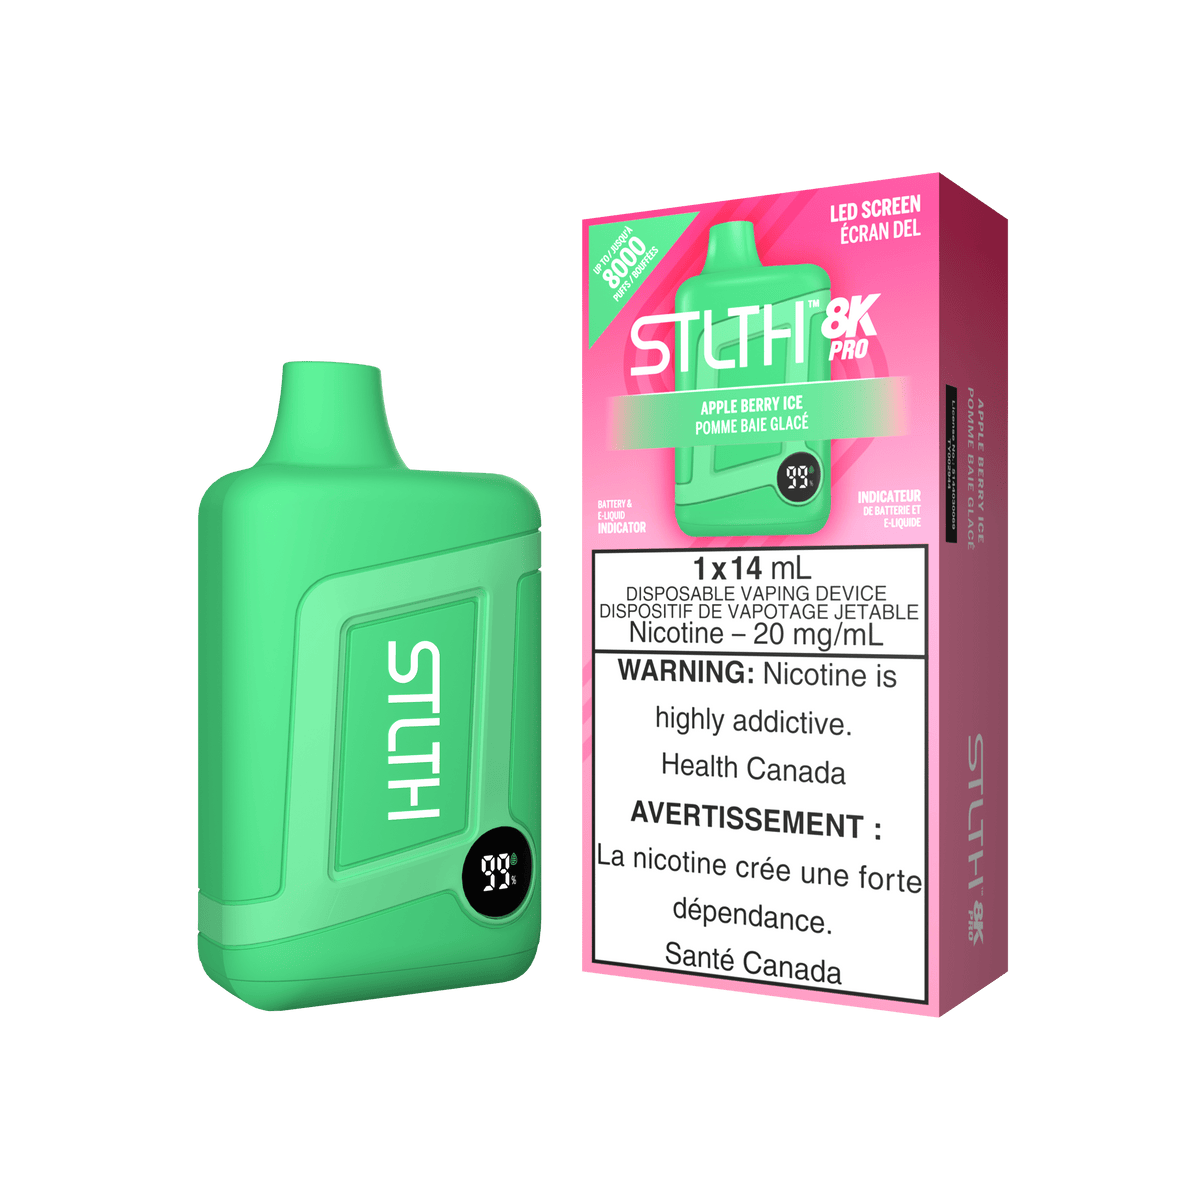 STLTH 8K Pro - Apple Berry Ice Disposable Vape available on Canada online vape shop